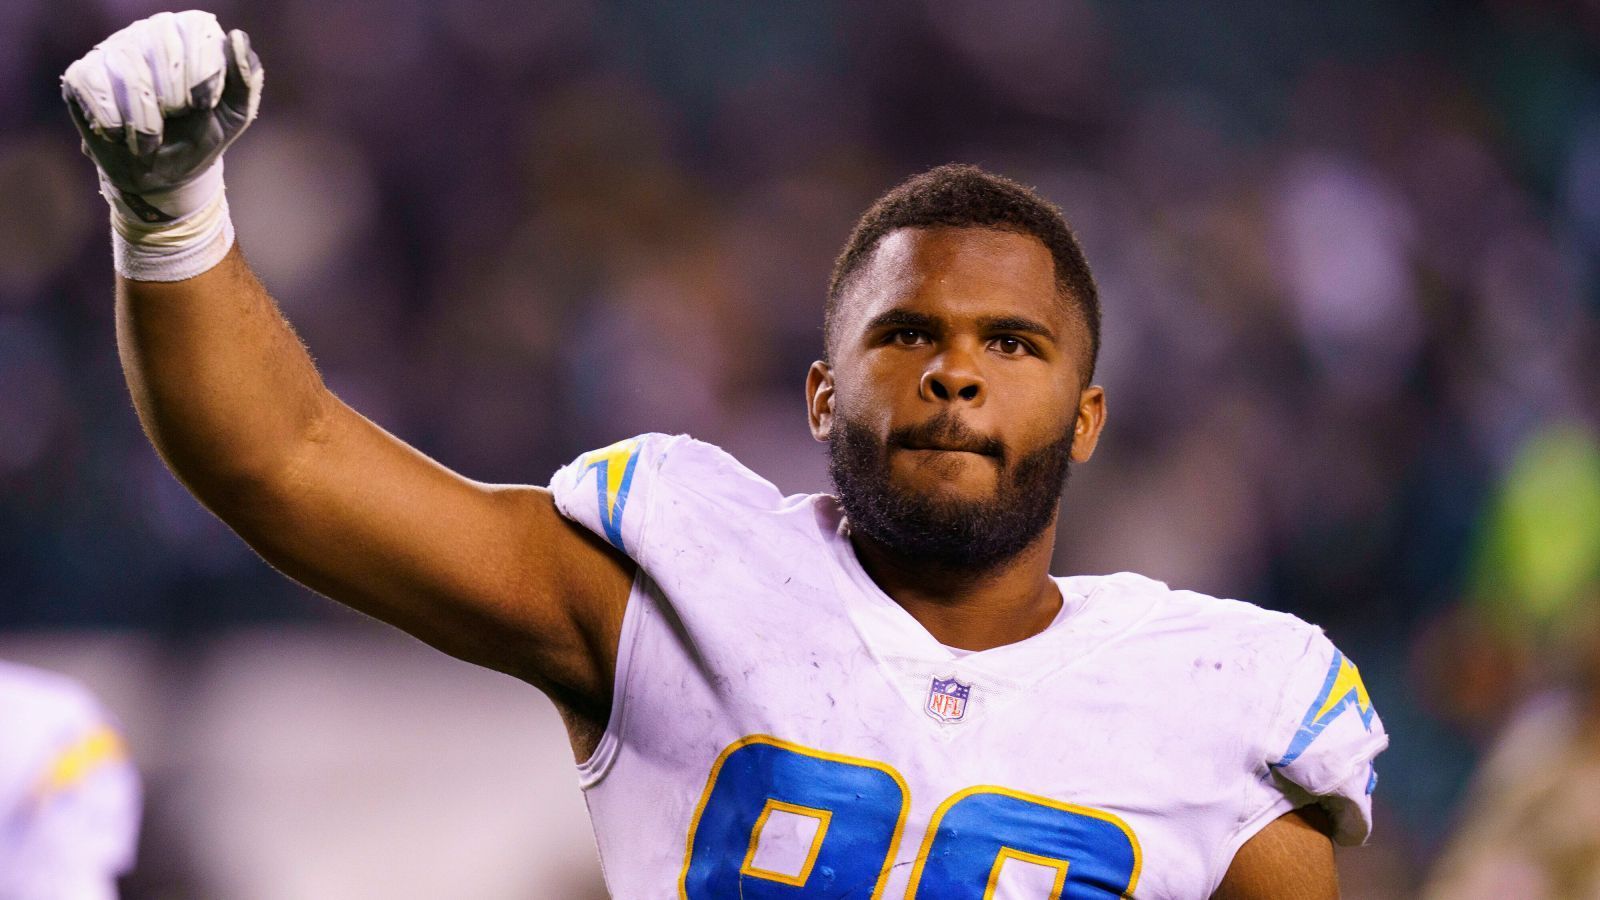 
                <strong>Jerry Tillery (Los Angeles Chargers)</strong><br>
                &#x2022; Position: Defensive Tackle<br>&#x2022; Draft-Position 2019: 28<br>&#x2022; Option nicht gezogen<br>
              